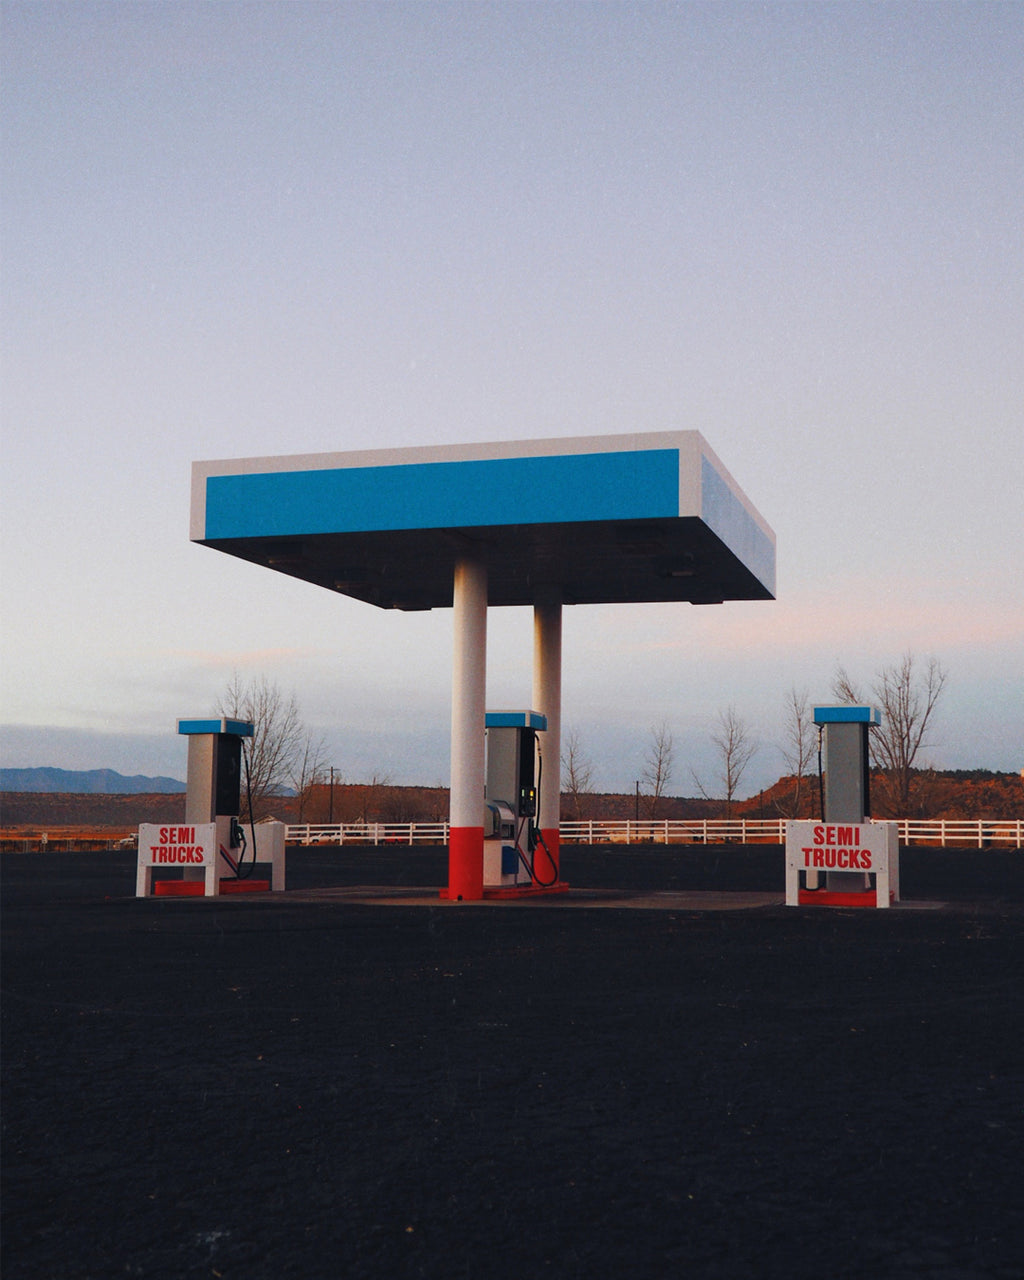 GAS STATION IN THE MIDDLE OF NOWHERE